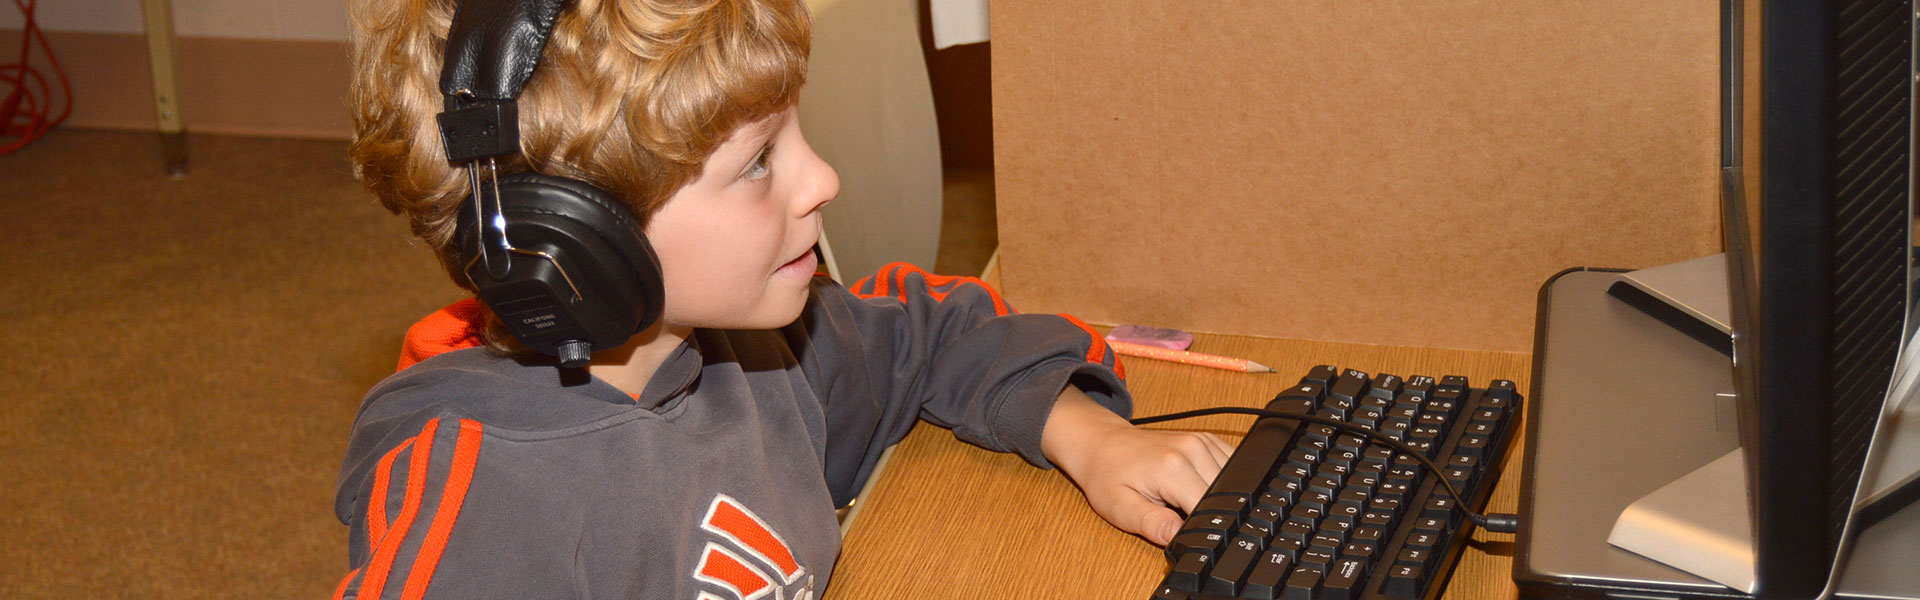 Sunman Elementary School Student Working with a Computer